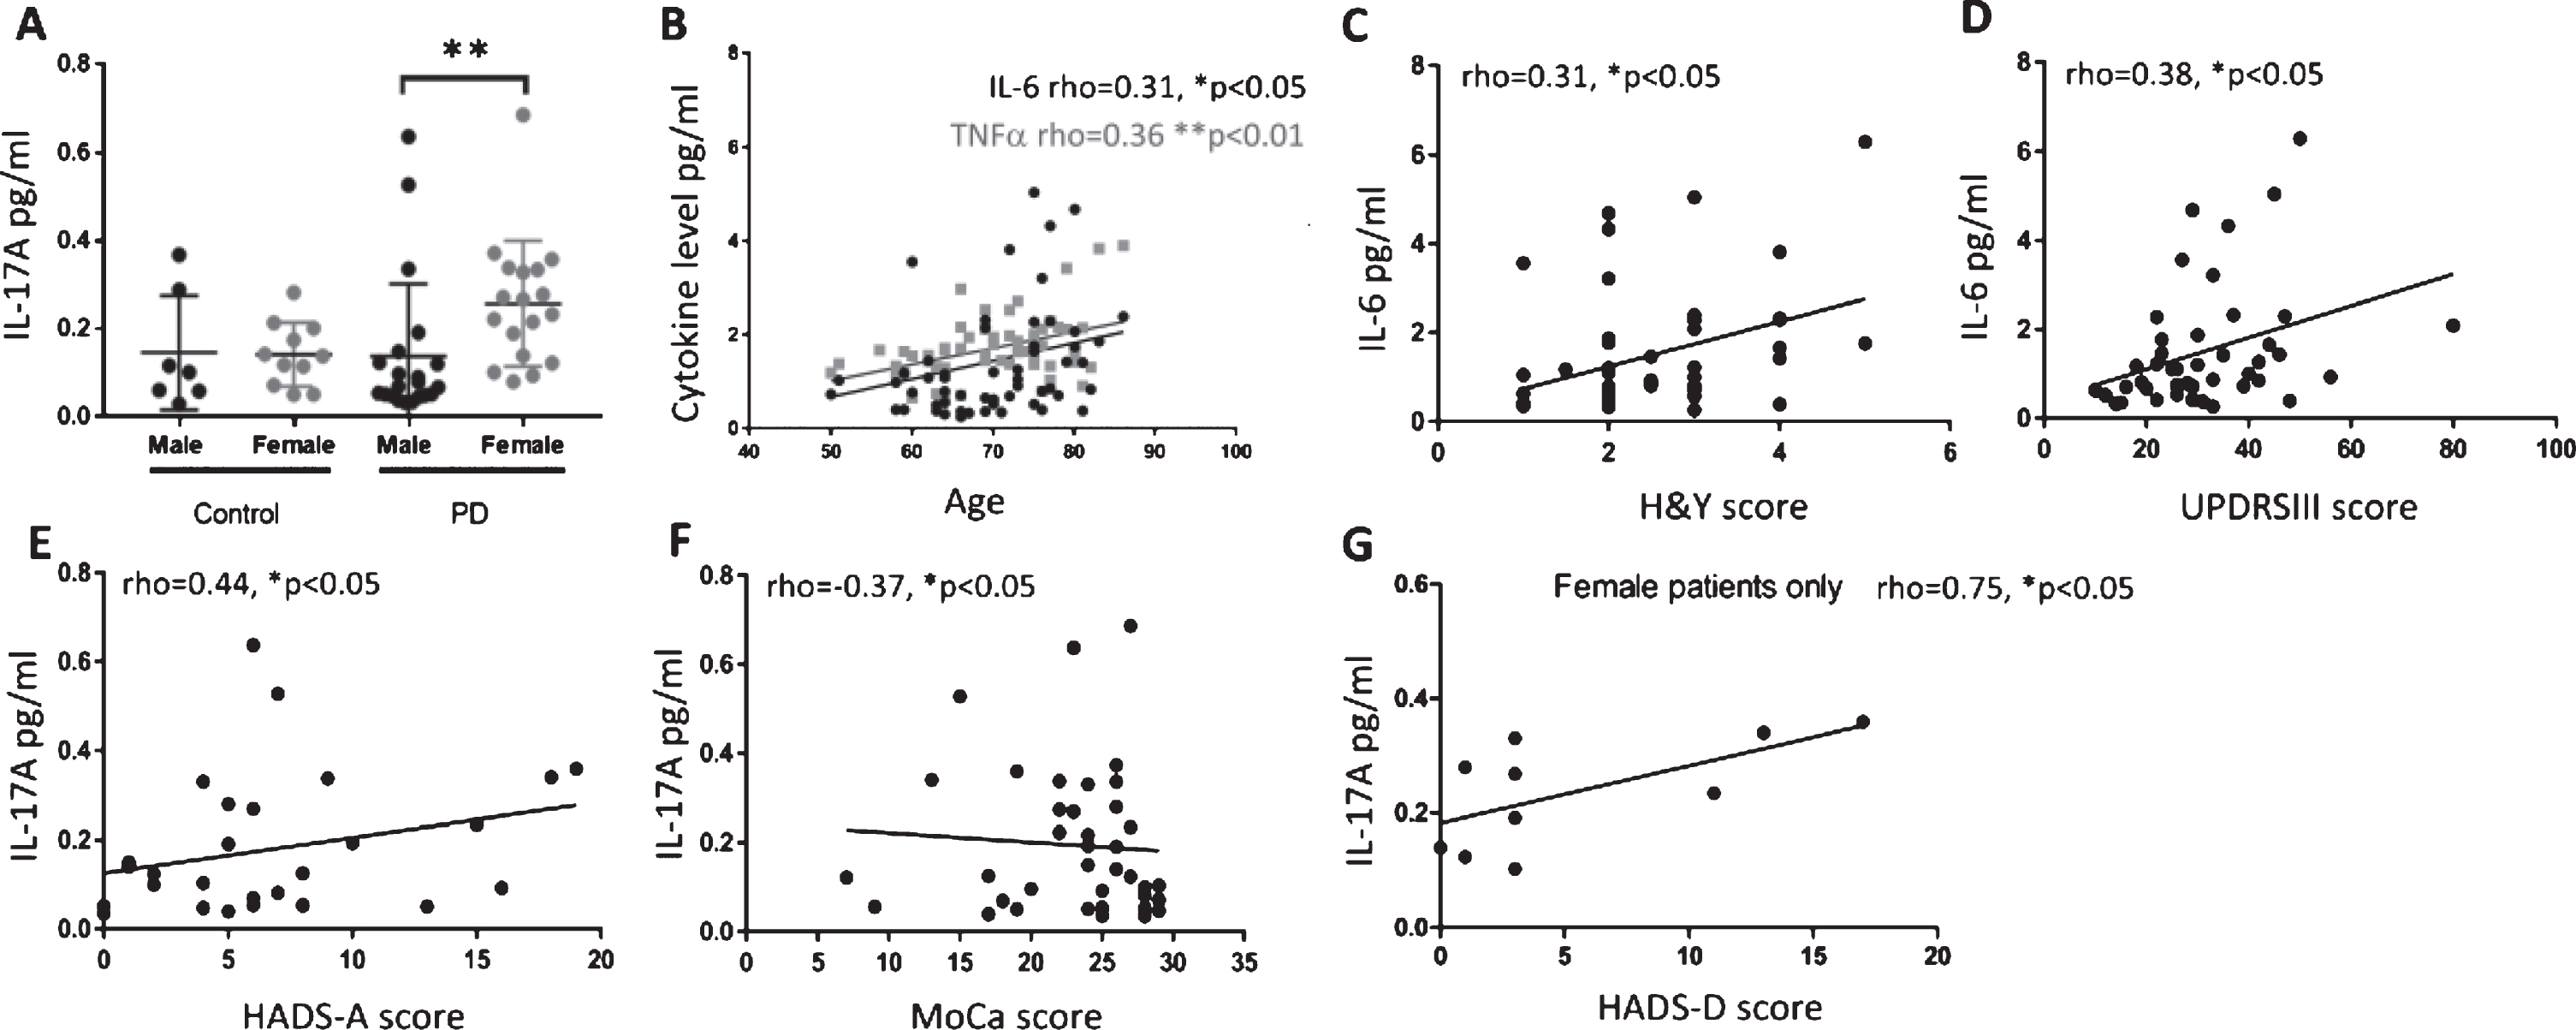 Plasma cytokines in PD patients correlate with motor and non-motor scores. Plasma IL-17A levels in healthy controls and PD patients divided by gender (A). IL-17A levels are significantly higher in female PD patients as compared to male PD patients (Kruskal-Wallis test, Dunn’s multiple comparisons test p < 0.01). Data expressed as mean±SD. (B) IL-6 and TNFα plasma levels positively correlate with age in PD patients. (C and D) IL-6 levels in PD patients positively correlate with H&Y and UPDRSIII scores. (E and F) IL-17A levels positively correlate with anxiety subscale of HADS and negatively correlate with MoCA scores in PD patients. (G) IL-17A levels positively correlate with depression subscale of HADS in female PD patients only. *p < 0.05, Spearman partial correlation, corrected for gender and LEDD score (B) or corrected for age, gender and LEDD score (C-F) or corrected for age and LEDD score (G). Other gender specific significant partial Spearman correlations indicated in text.